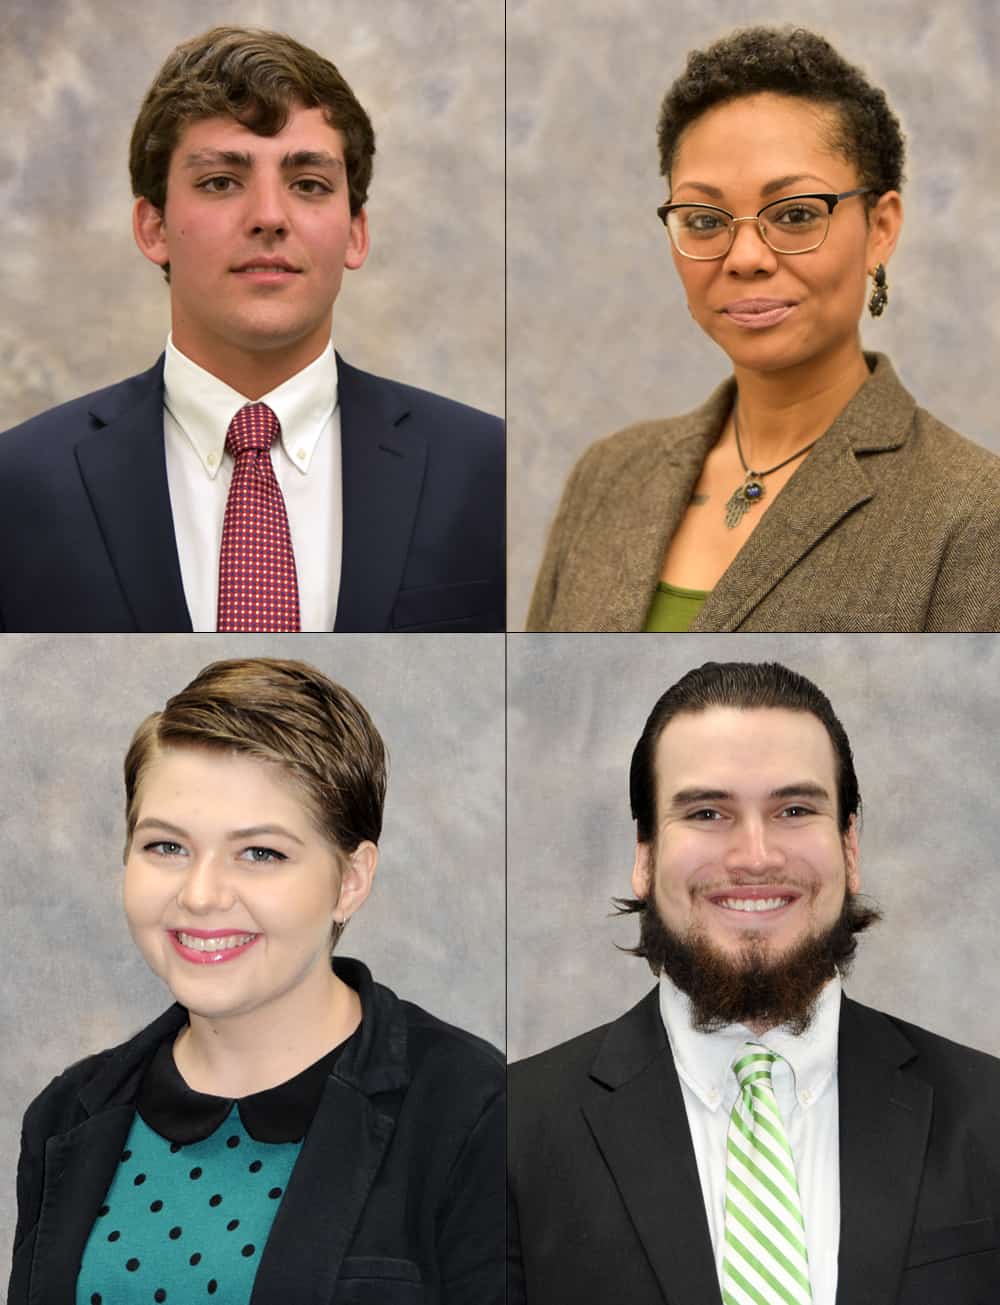 Clockwise from top left are GOAL semi-finalists Bailey Mills, Stephanie L. John, Noah McCleskey and Alexandra Joiner. The four semi-finalists will interview with a selection committee comprised of community leaders in order for a chance to compete for the statewide GOAL title.